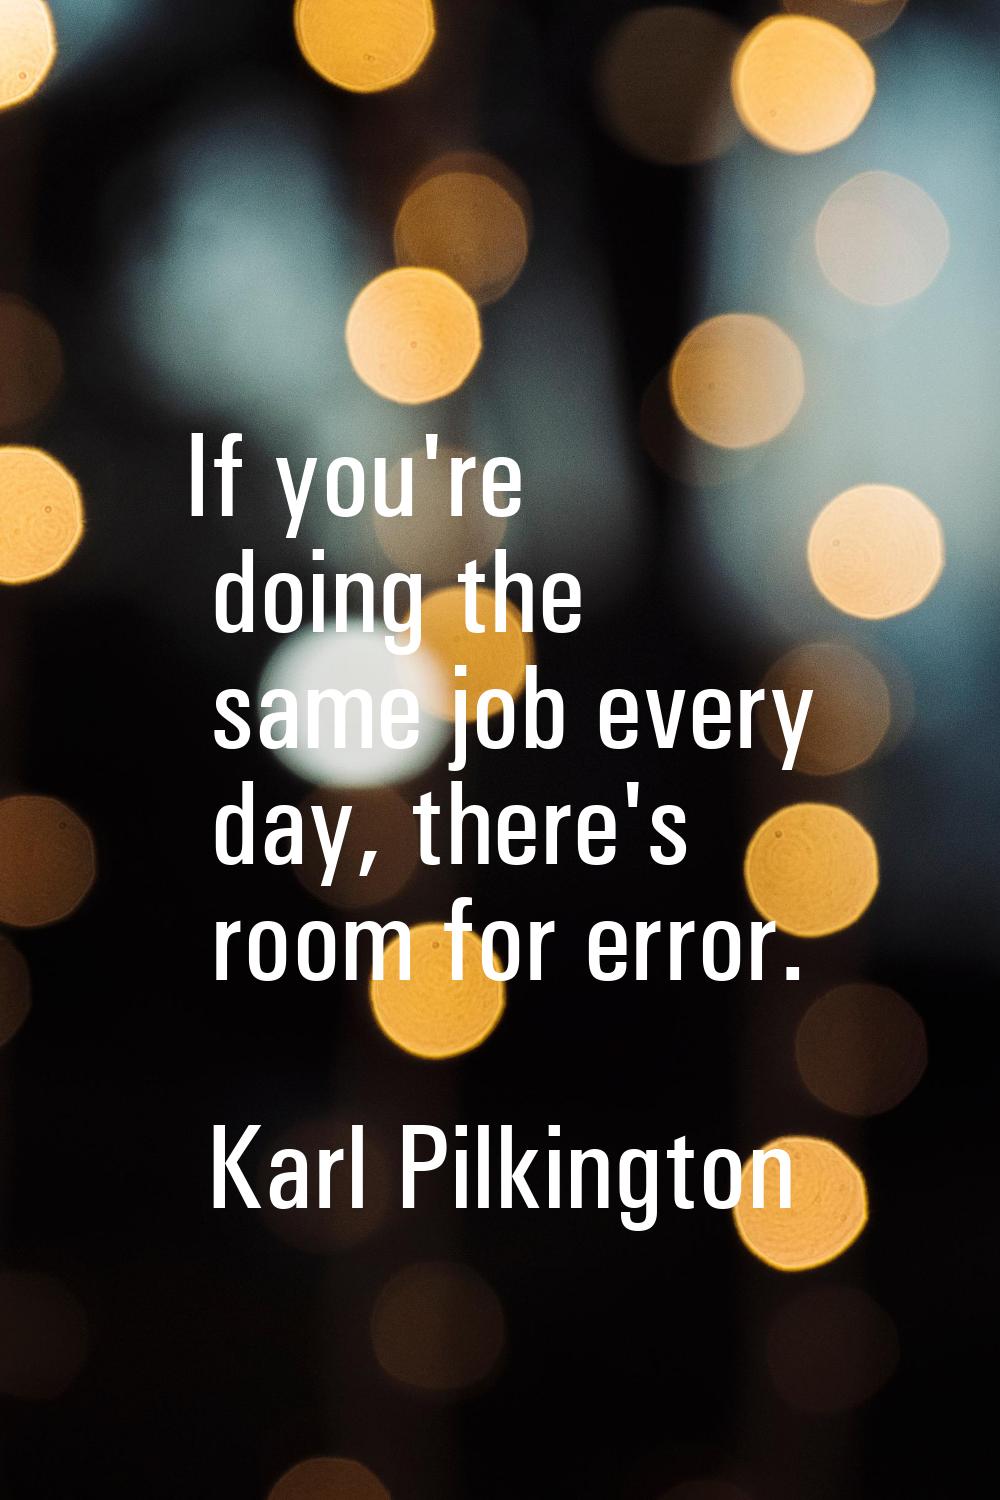 If you're doing the same job every day, there's room for error.